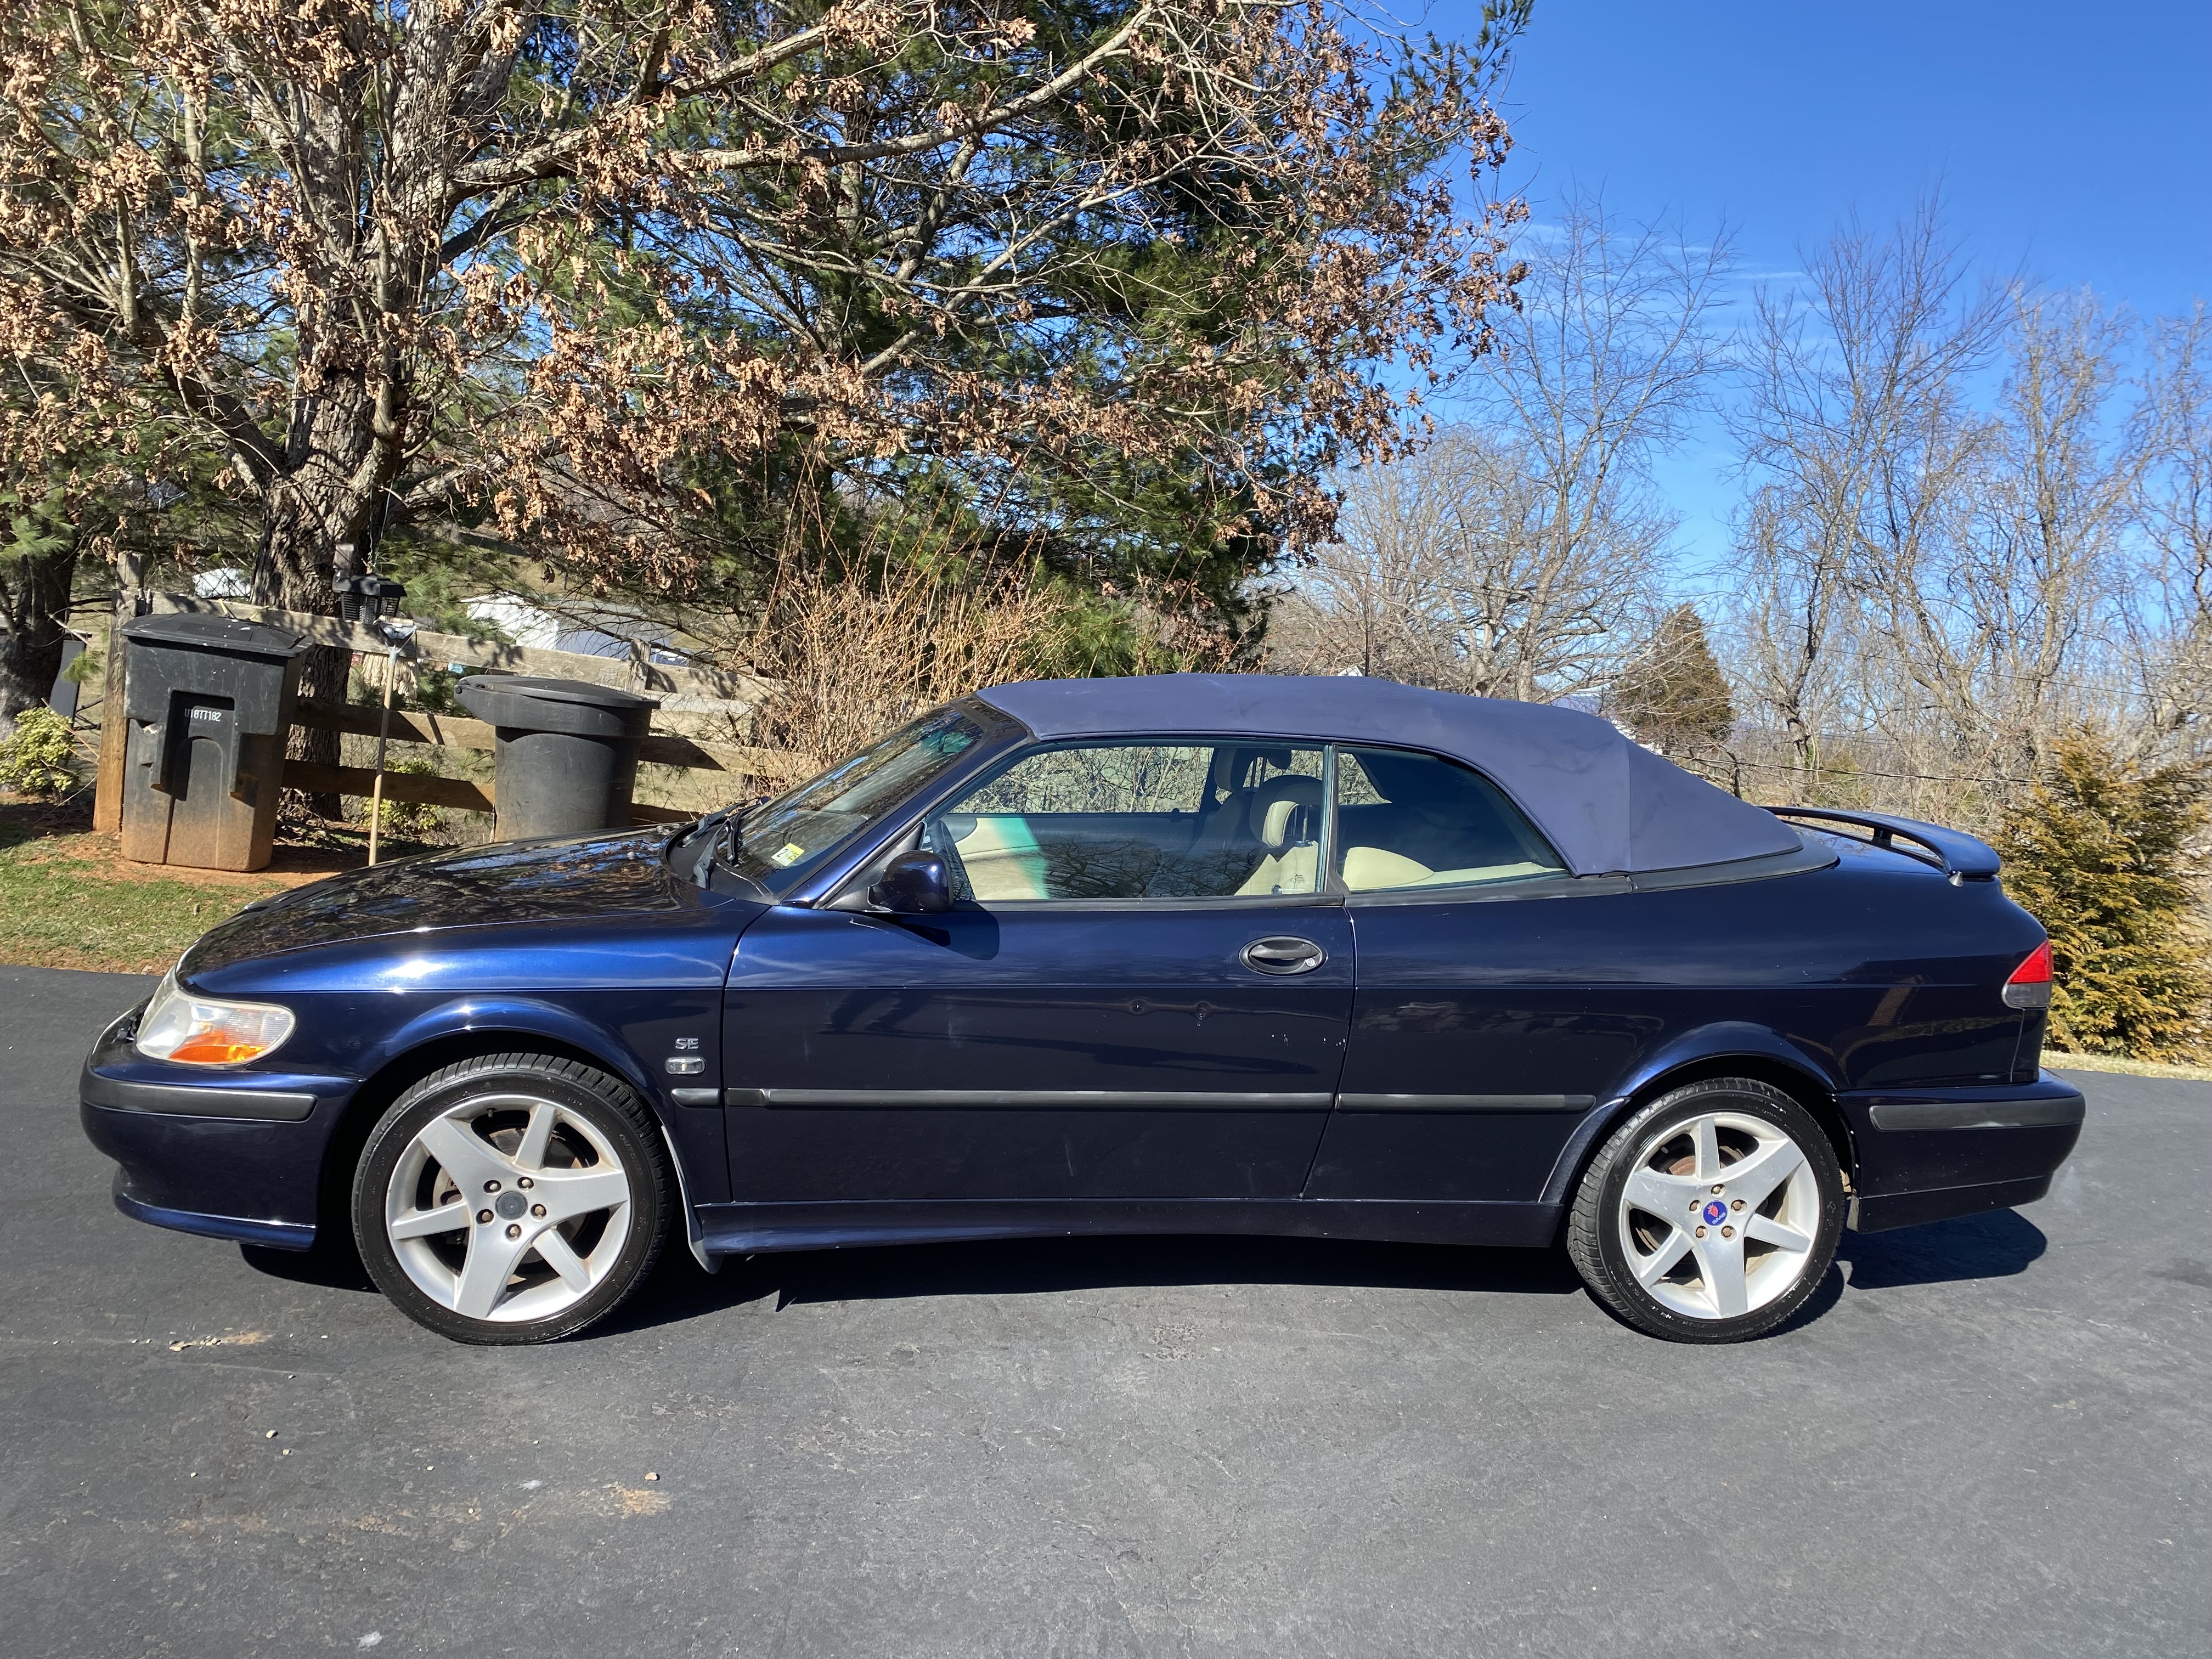 Used Saab 9-3 Convertible Buyer's Guide